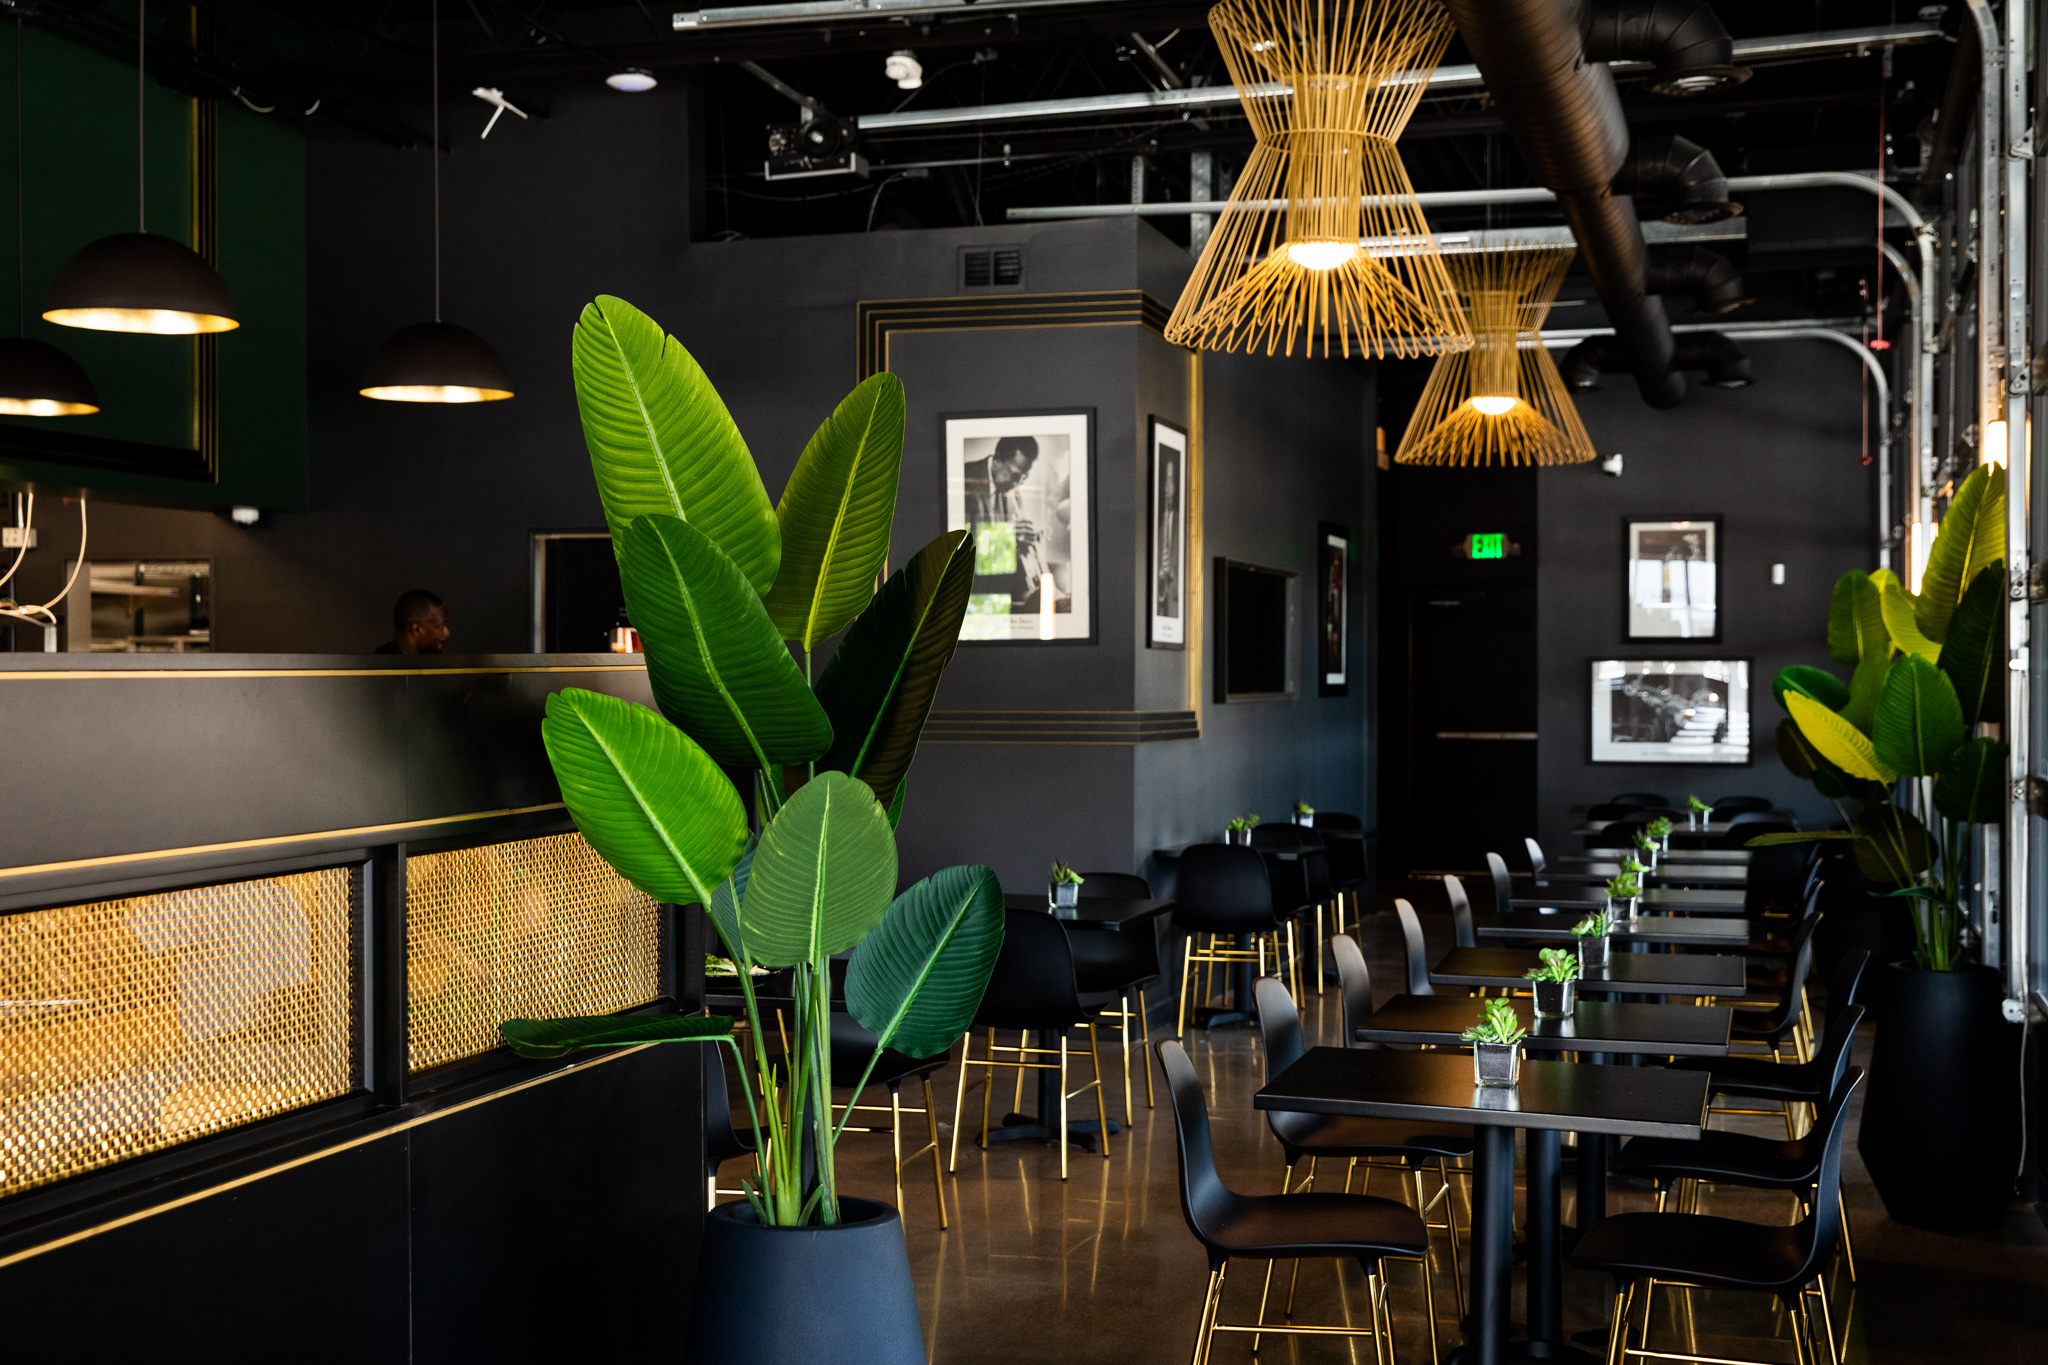 The interior of a restaurant with black walls, black seating, gold accents, and a green plant